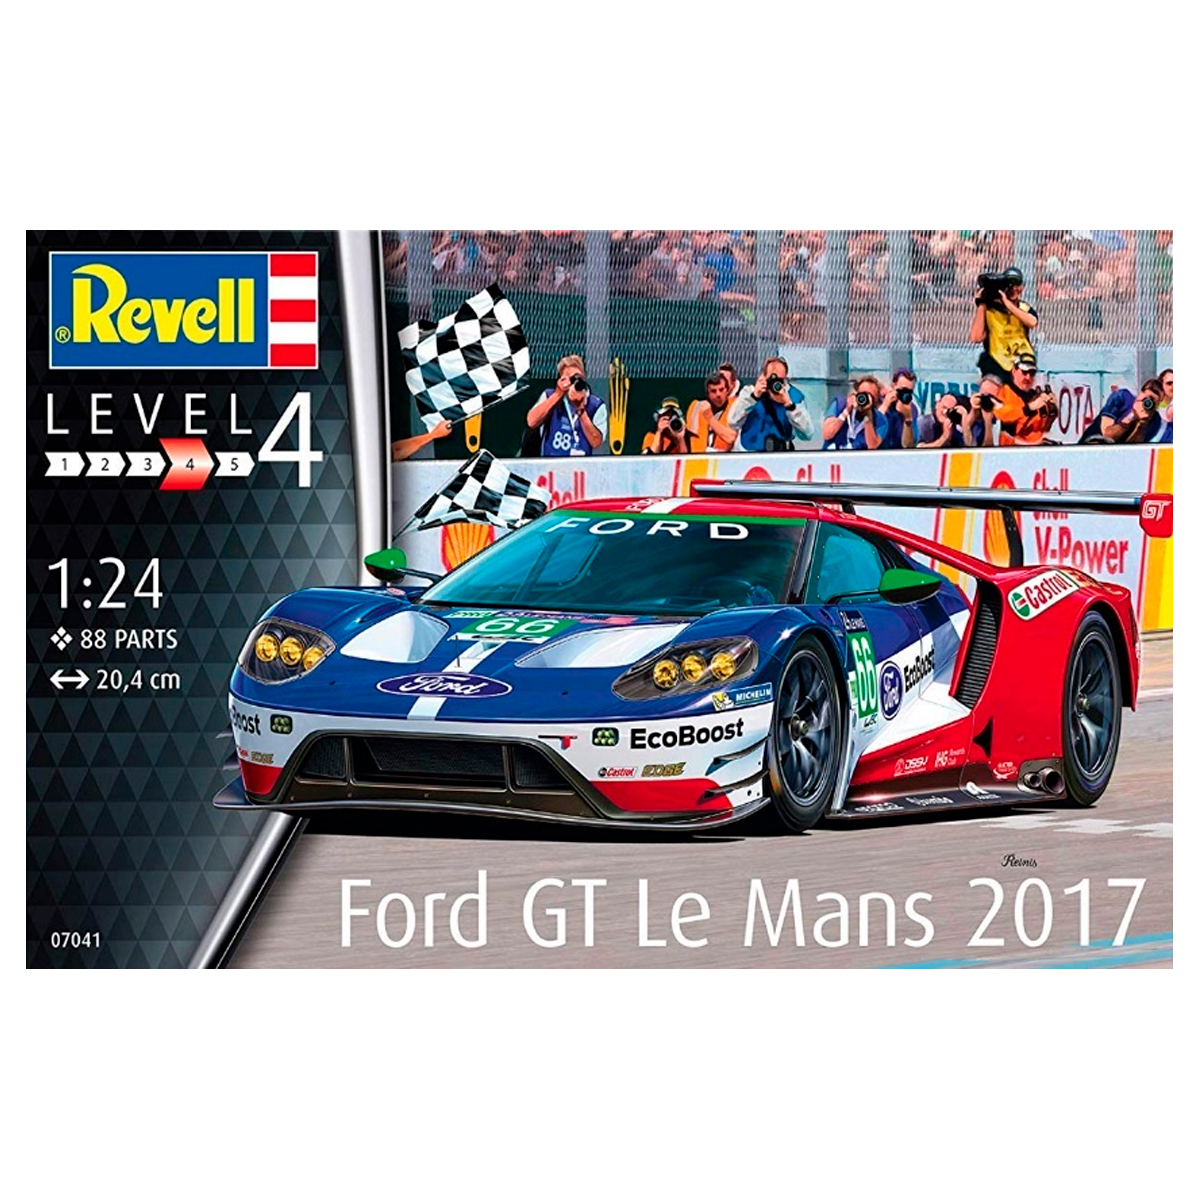 1/24 Ford GT Le Mans 2017